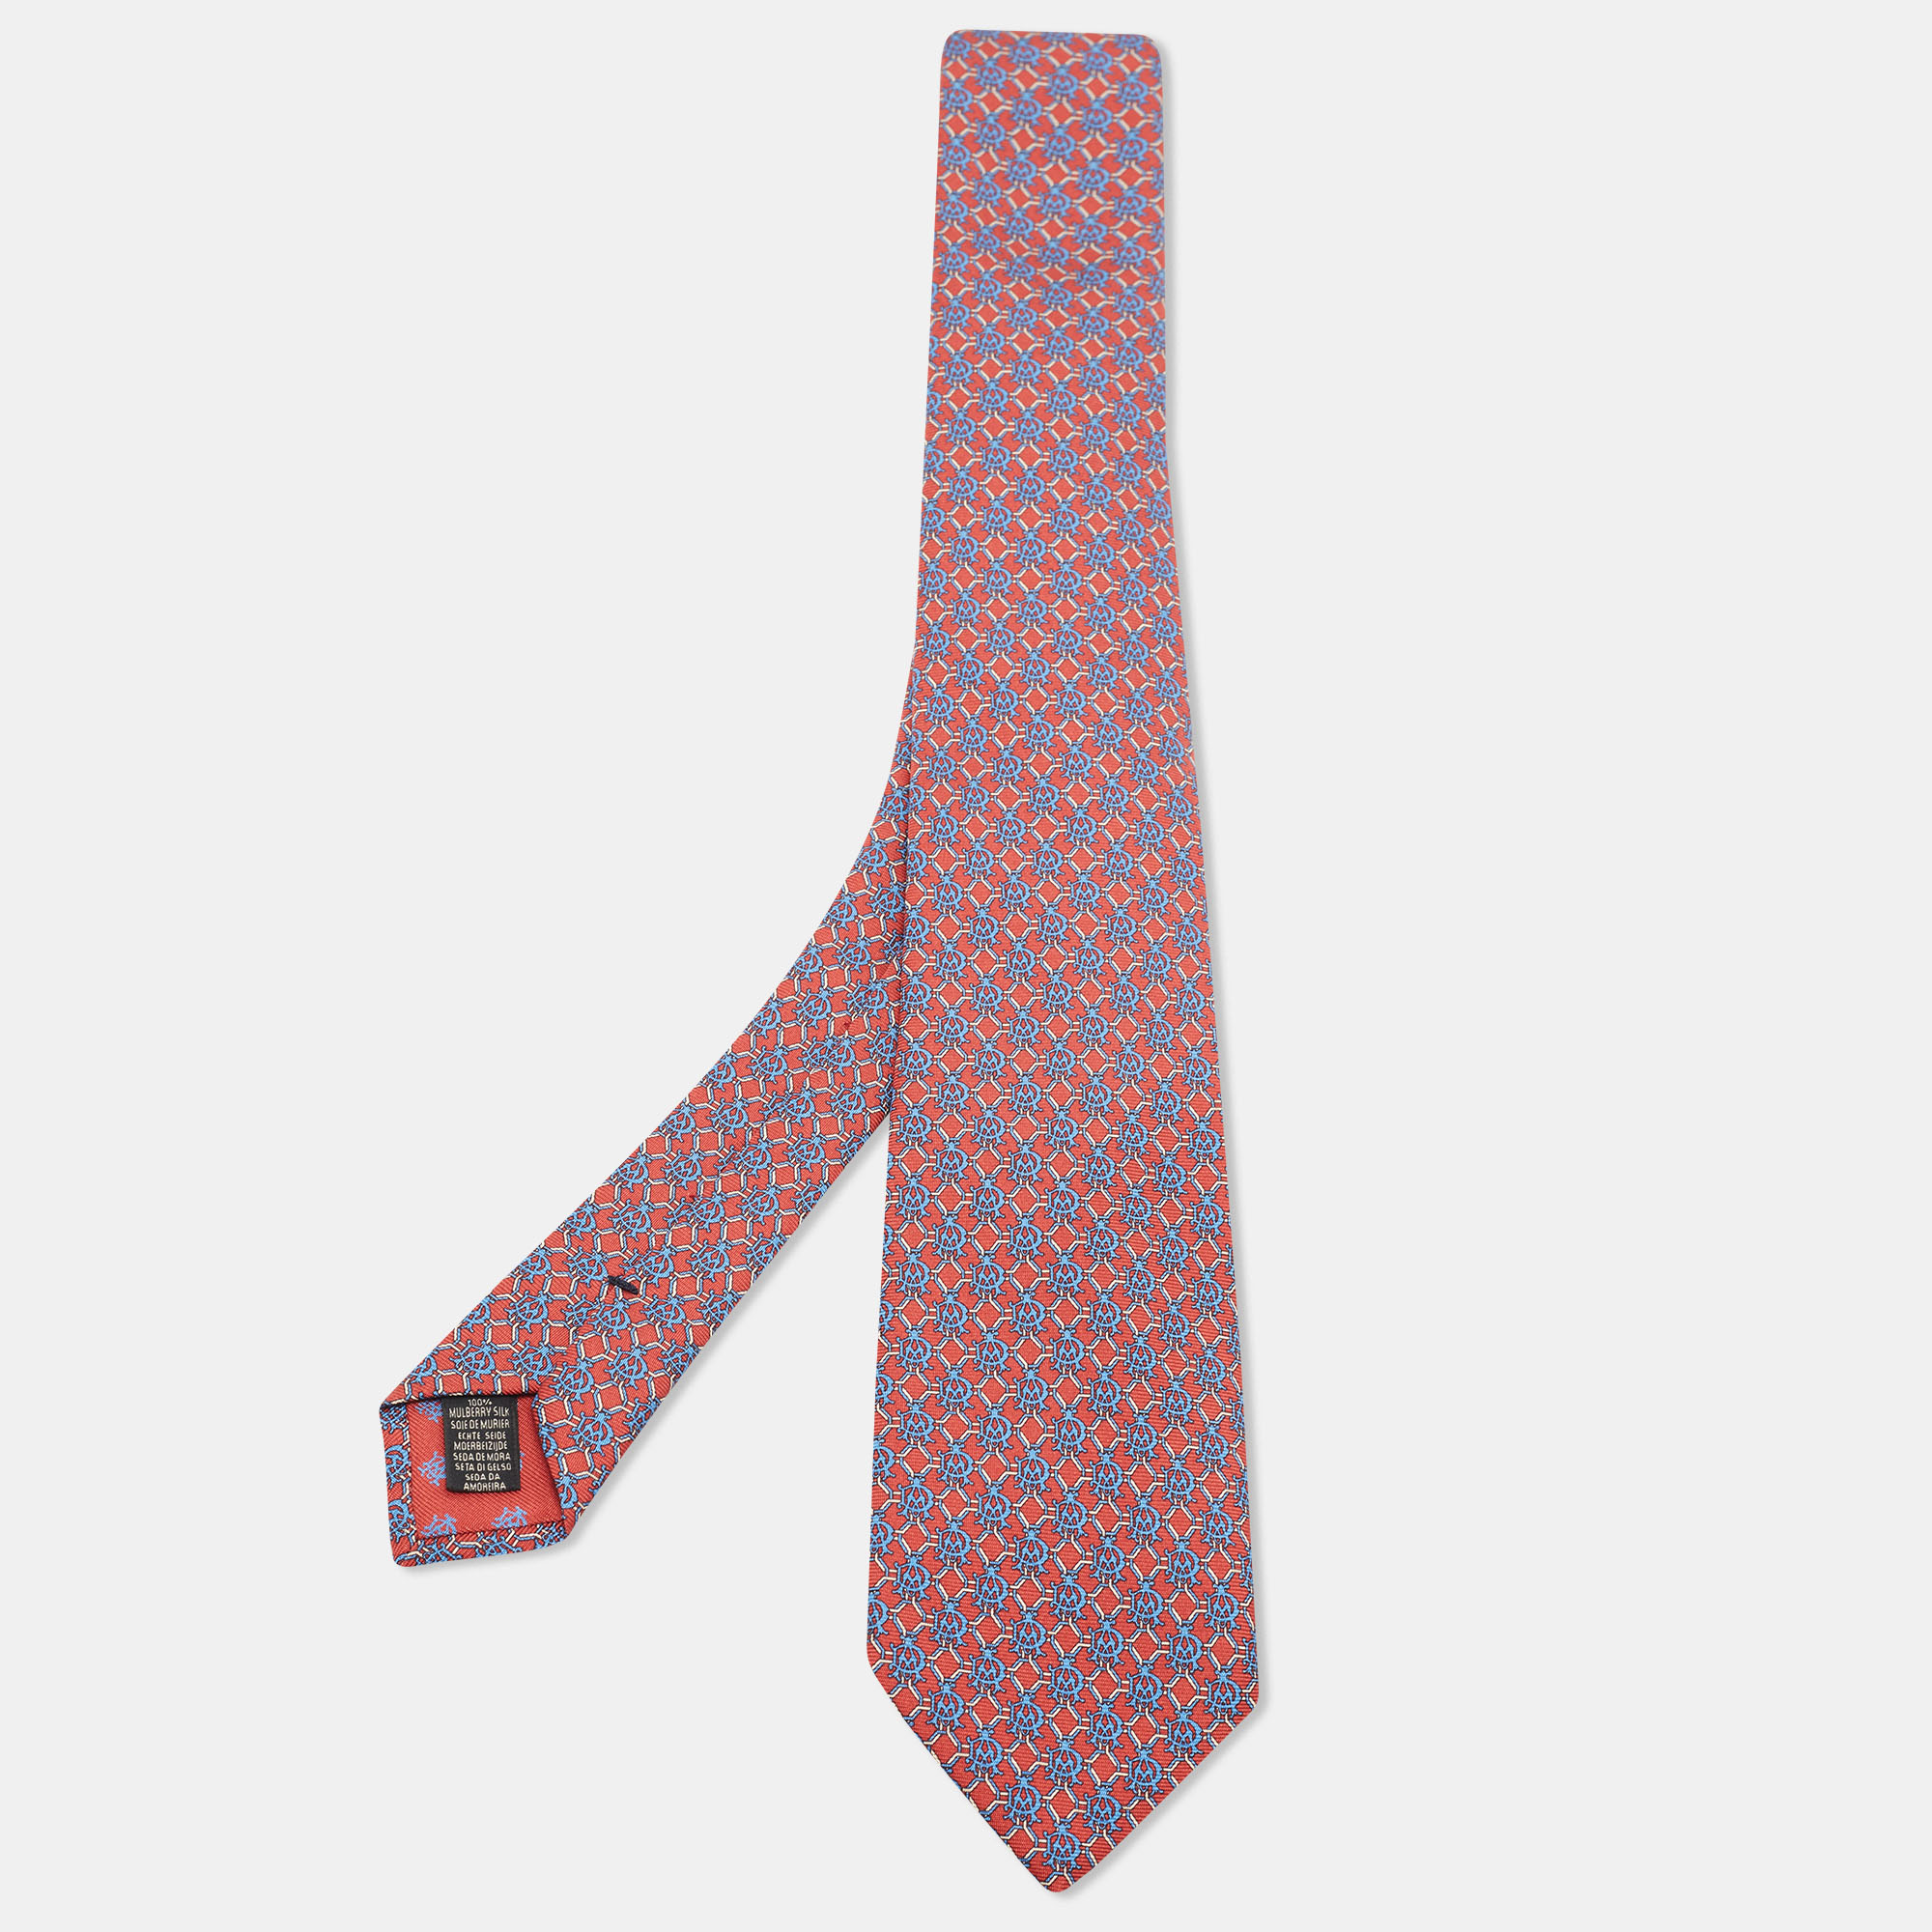 Dunhill Red Square Linked Alfred Dunhill Print Silk Tie